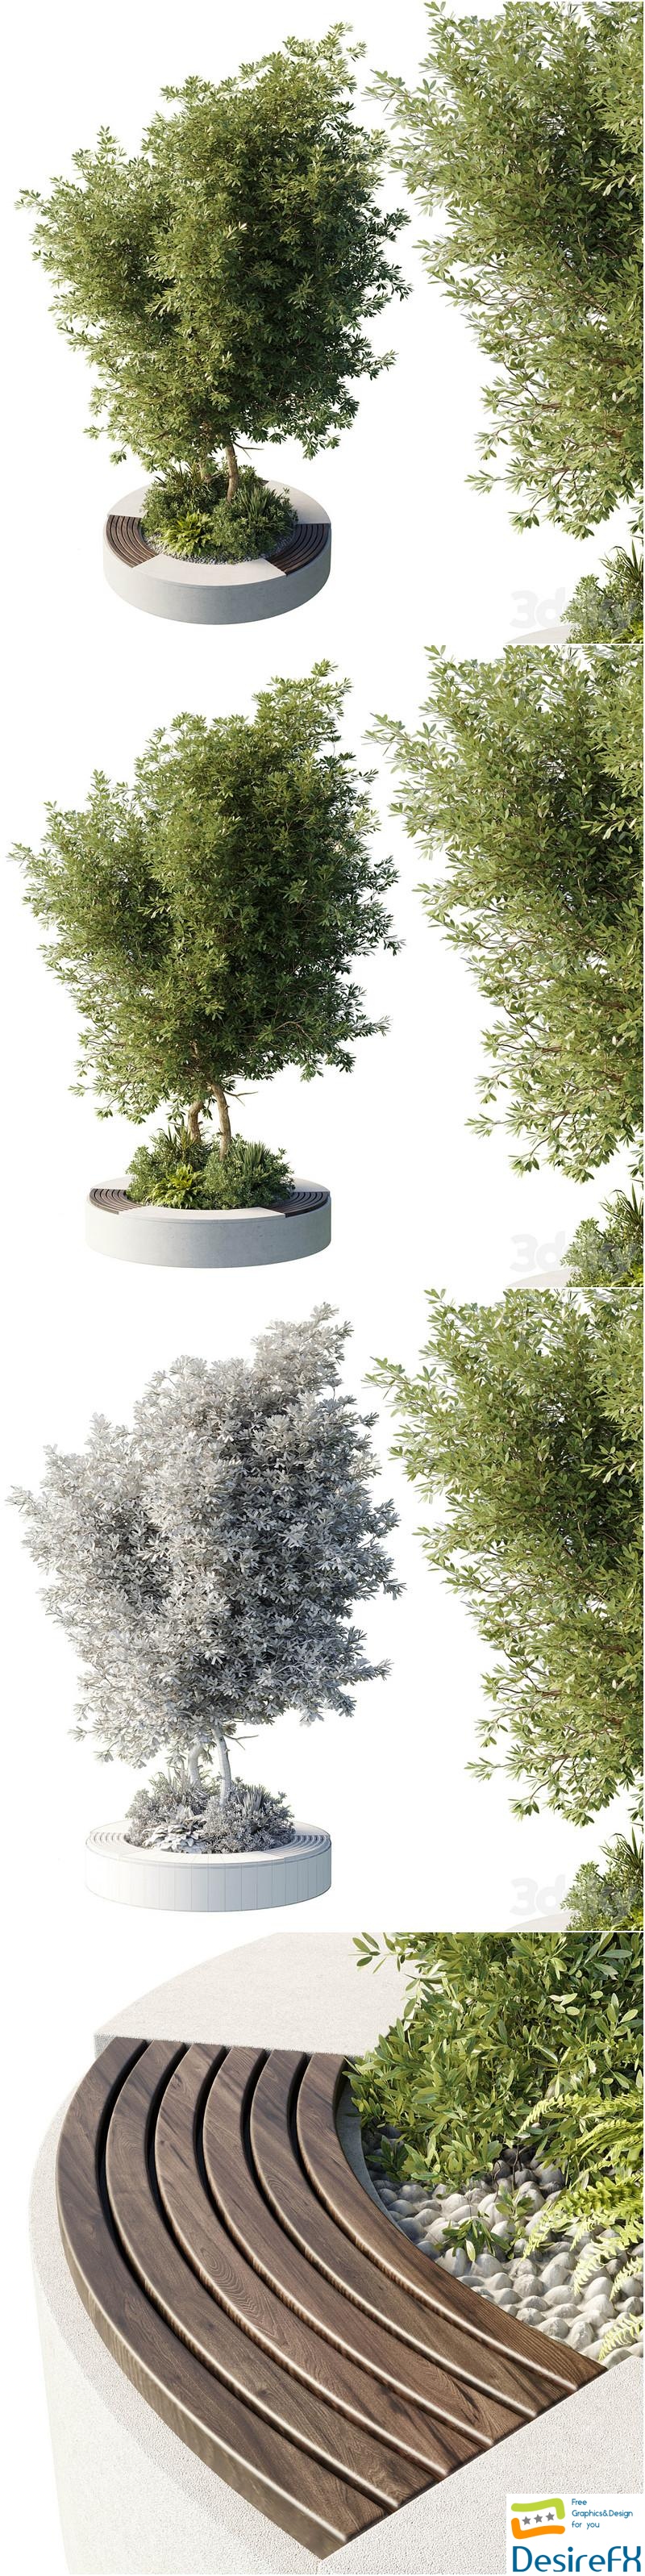 Urban Environment - Urban Furniture - Green Benches With tree 43 3D Model